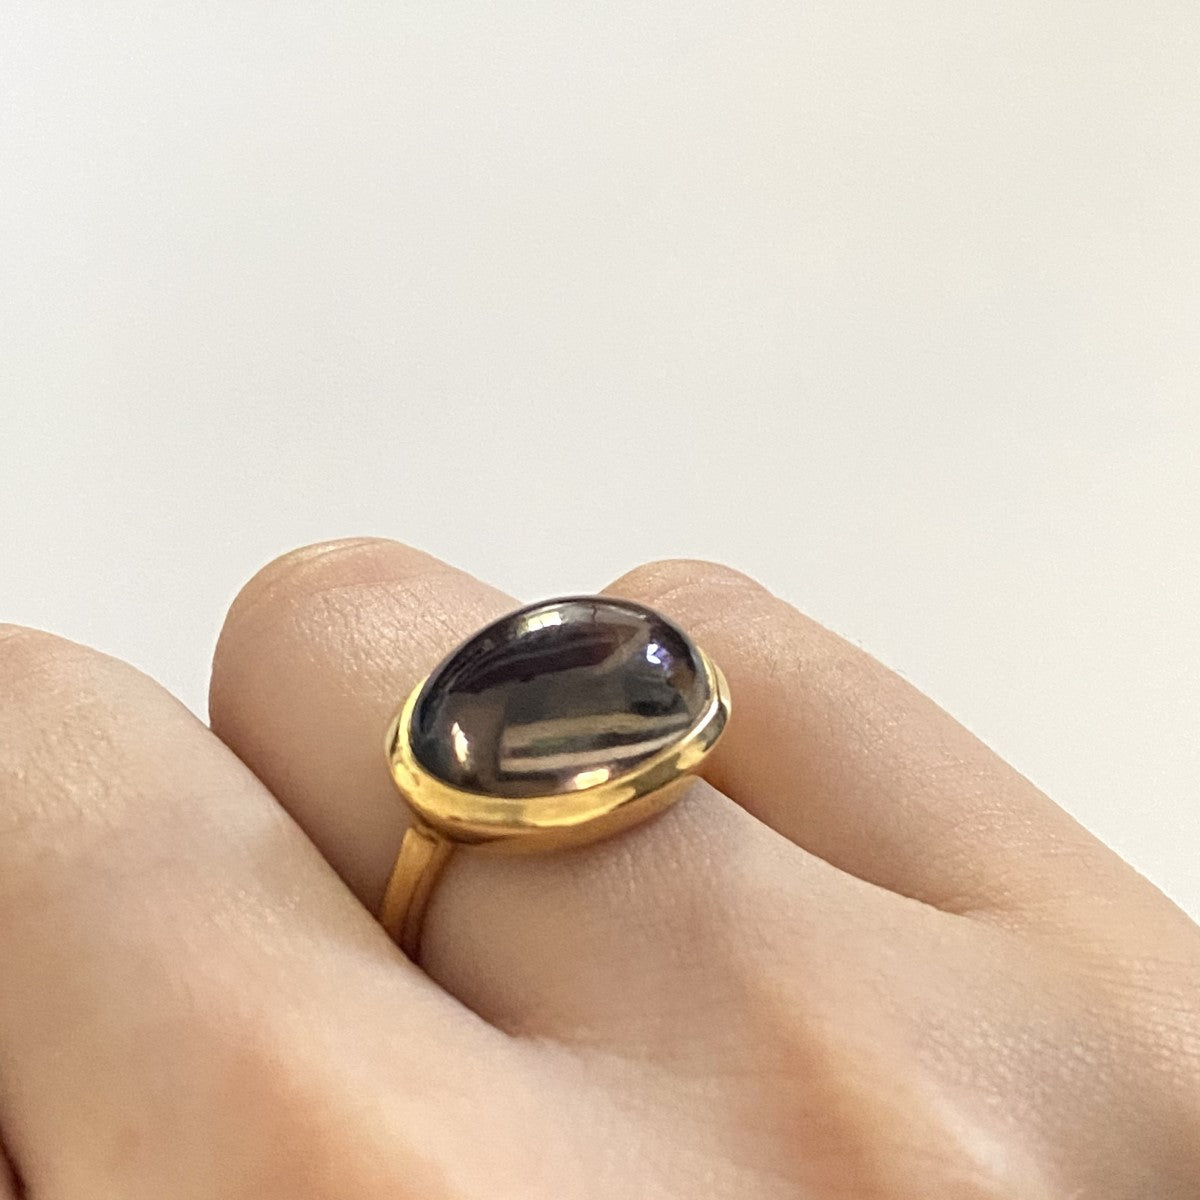 Cabochon Oval Cut Natural Gemstone Gold Plated Sterling Silver Ring - Smoky Quartz